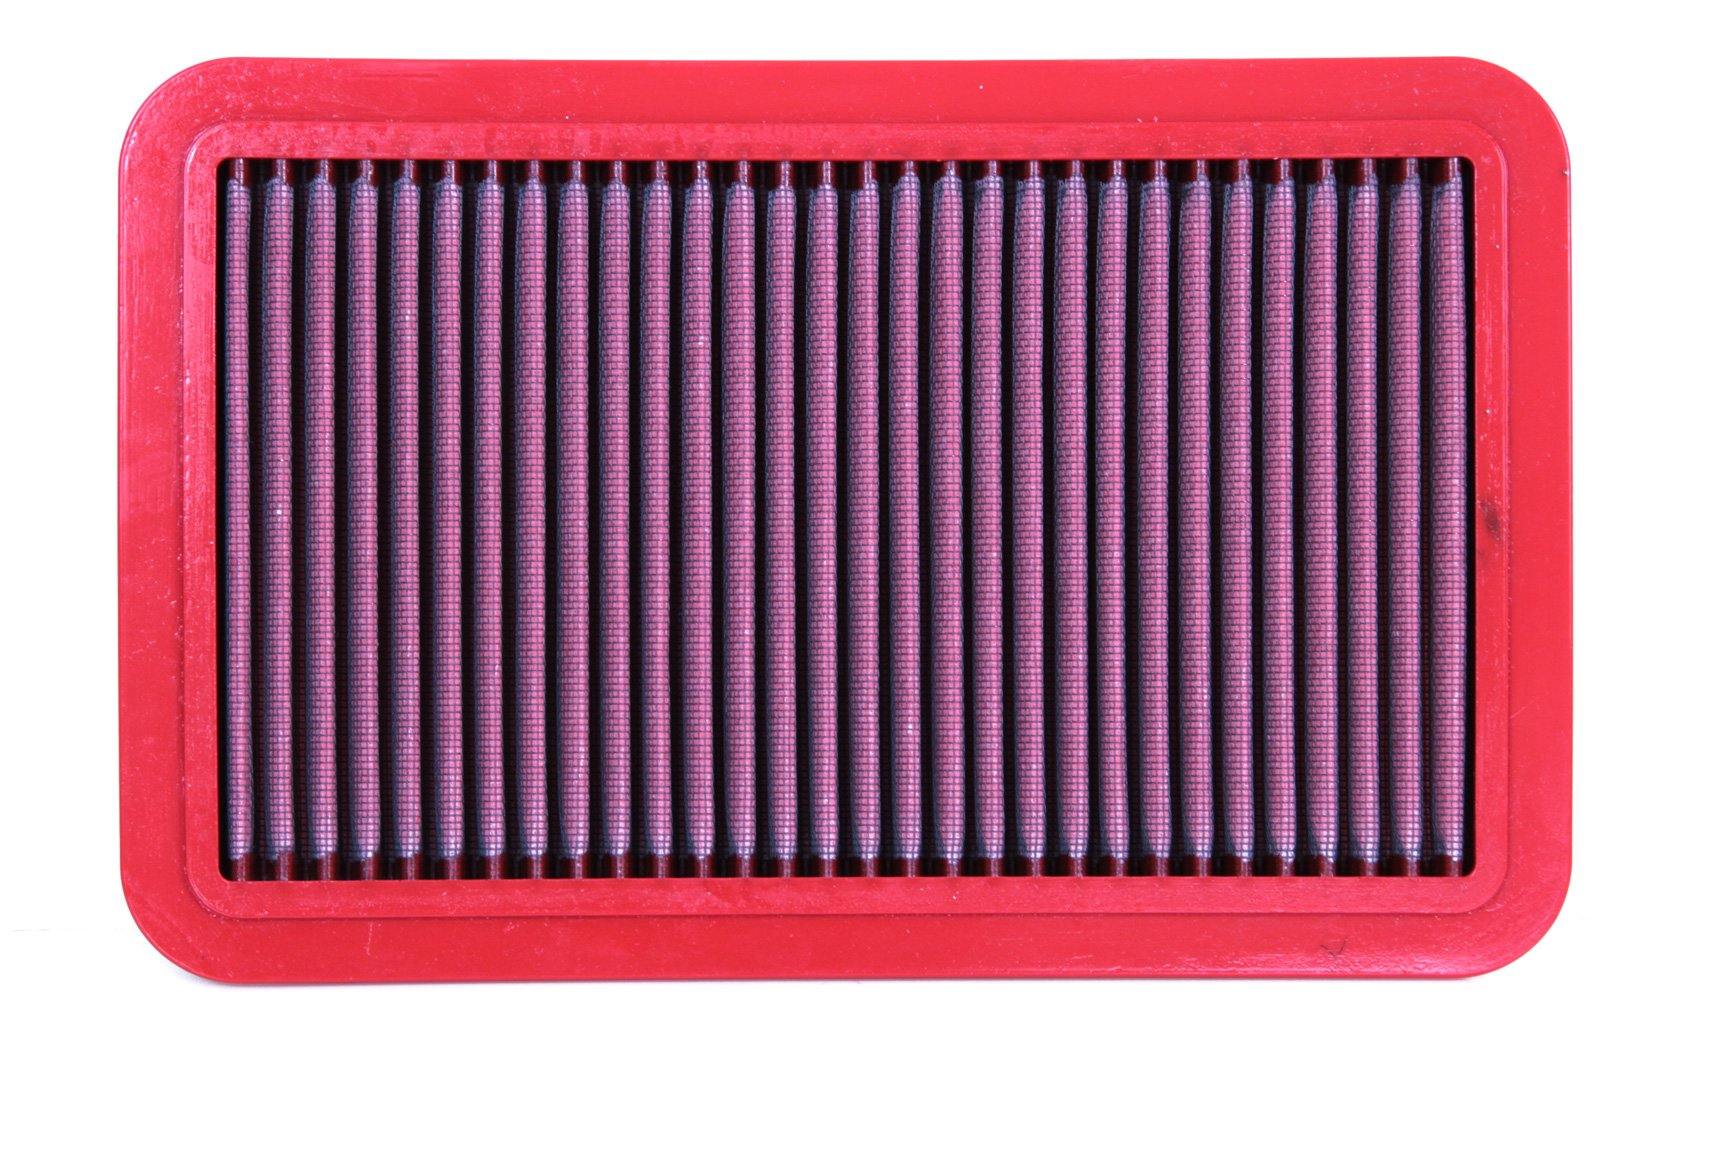 BMC Air Filter fits for Mazda 2 1.3 & 3 1.6 Cars - Durian Bikers